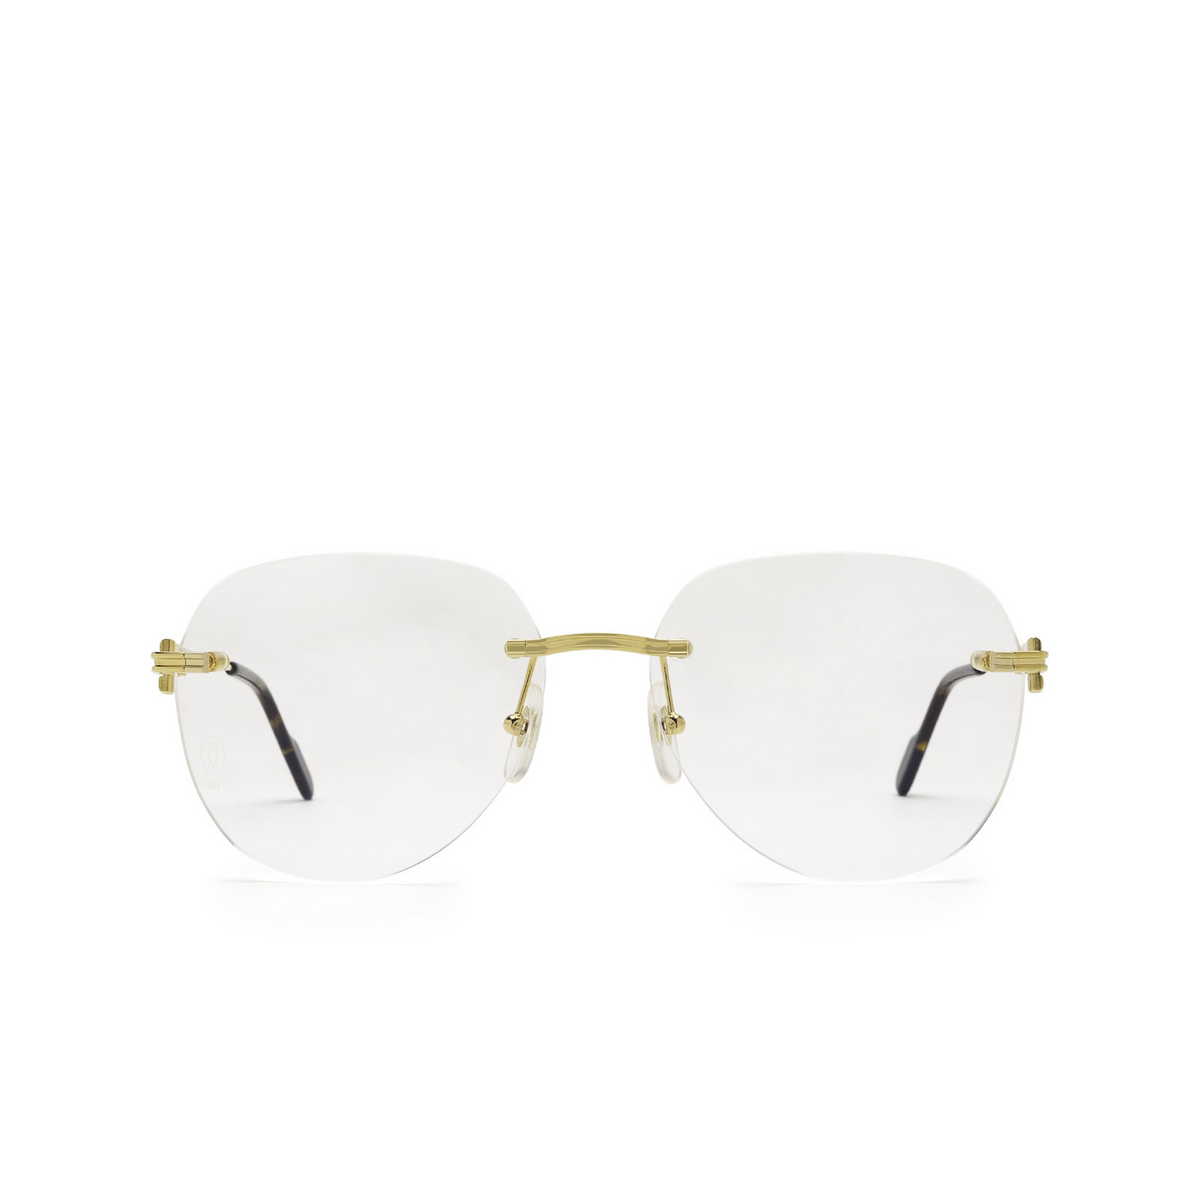 Cartier® Oval Eyeglasses: CT0252O color Gold 002 - front view.